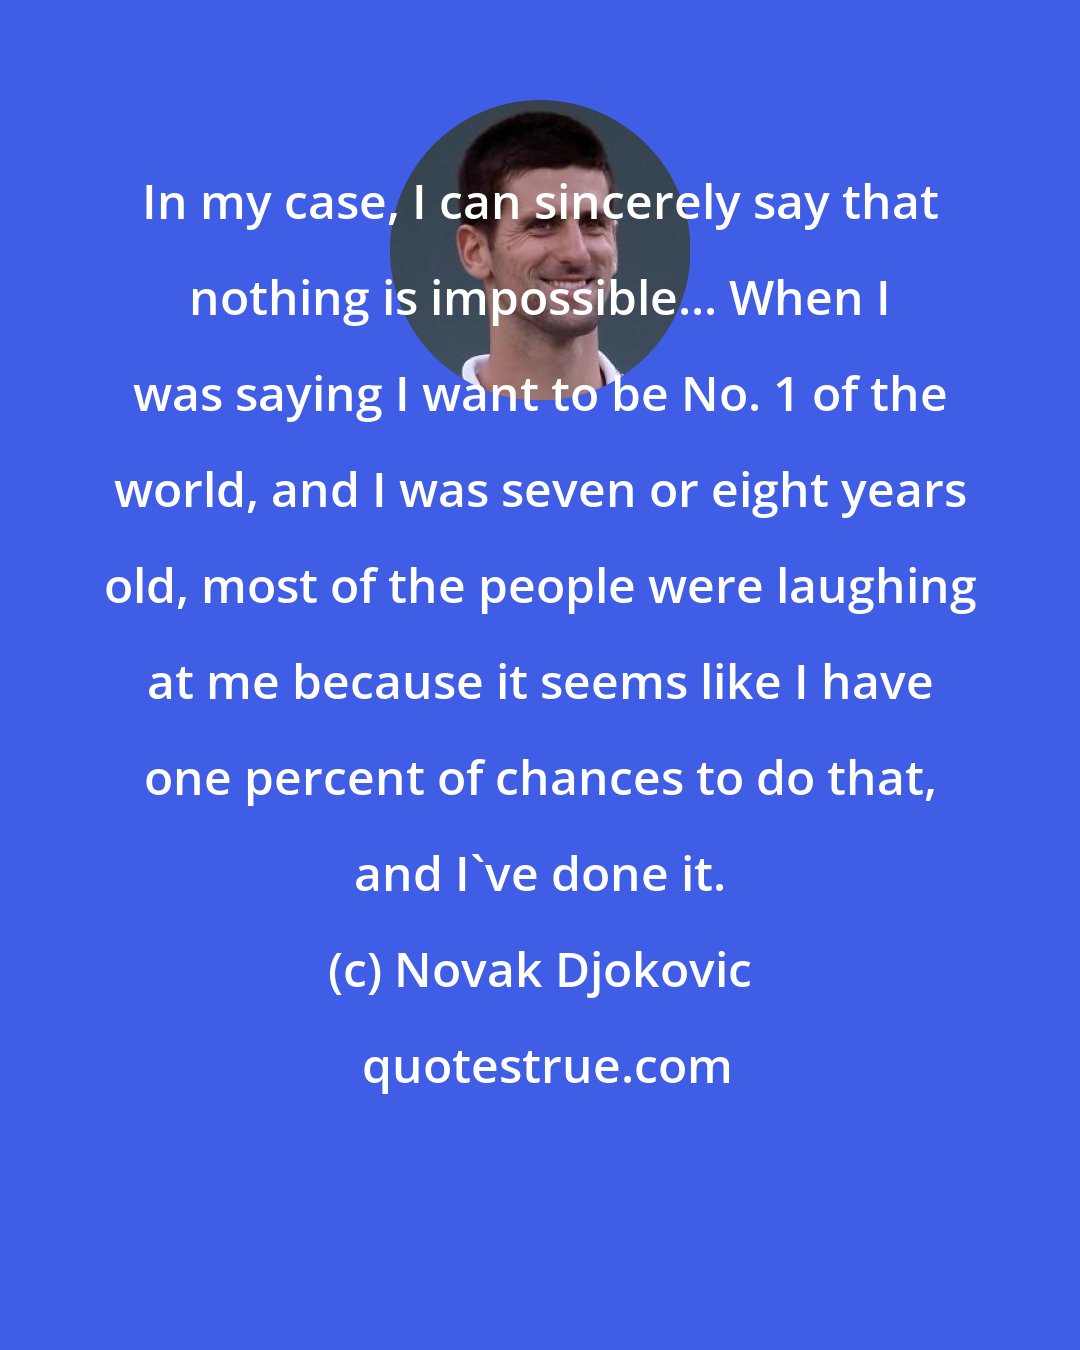 Novak Djokovic: In my case, I can sincerely say that nothing is impossible... When I was saying I want to be No. 1 of the world, and I was seven or eight years old, most of the people were laughing at me because it seems like I have one percent of chances to do that, and I've done it.